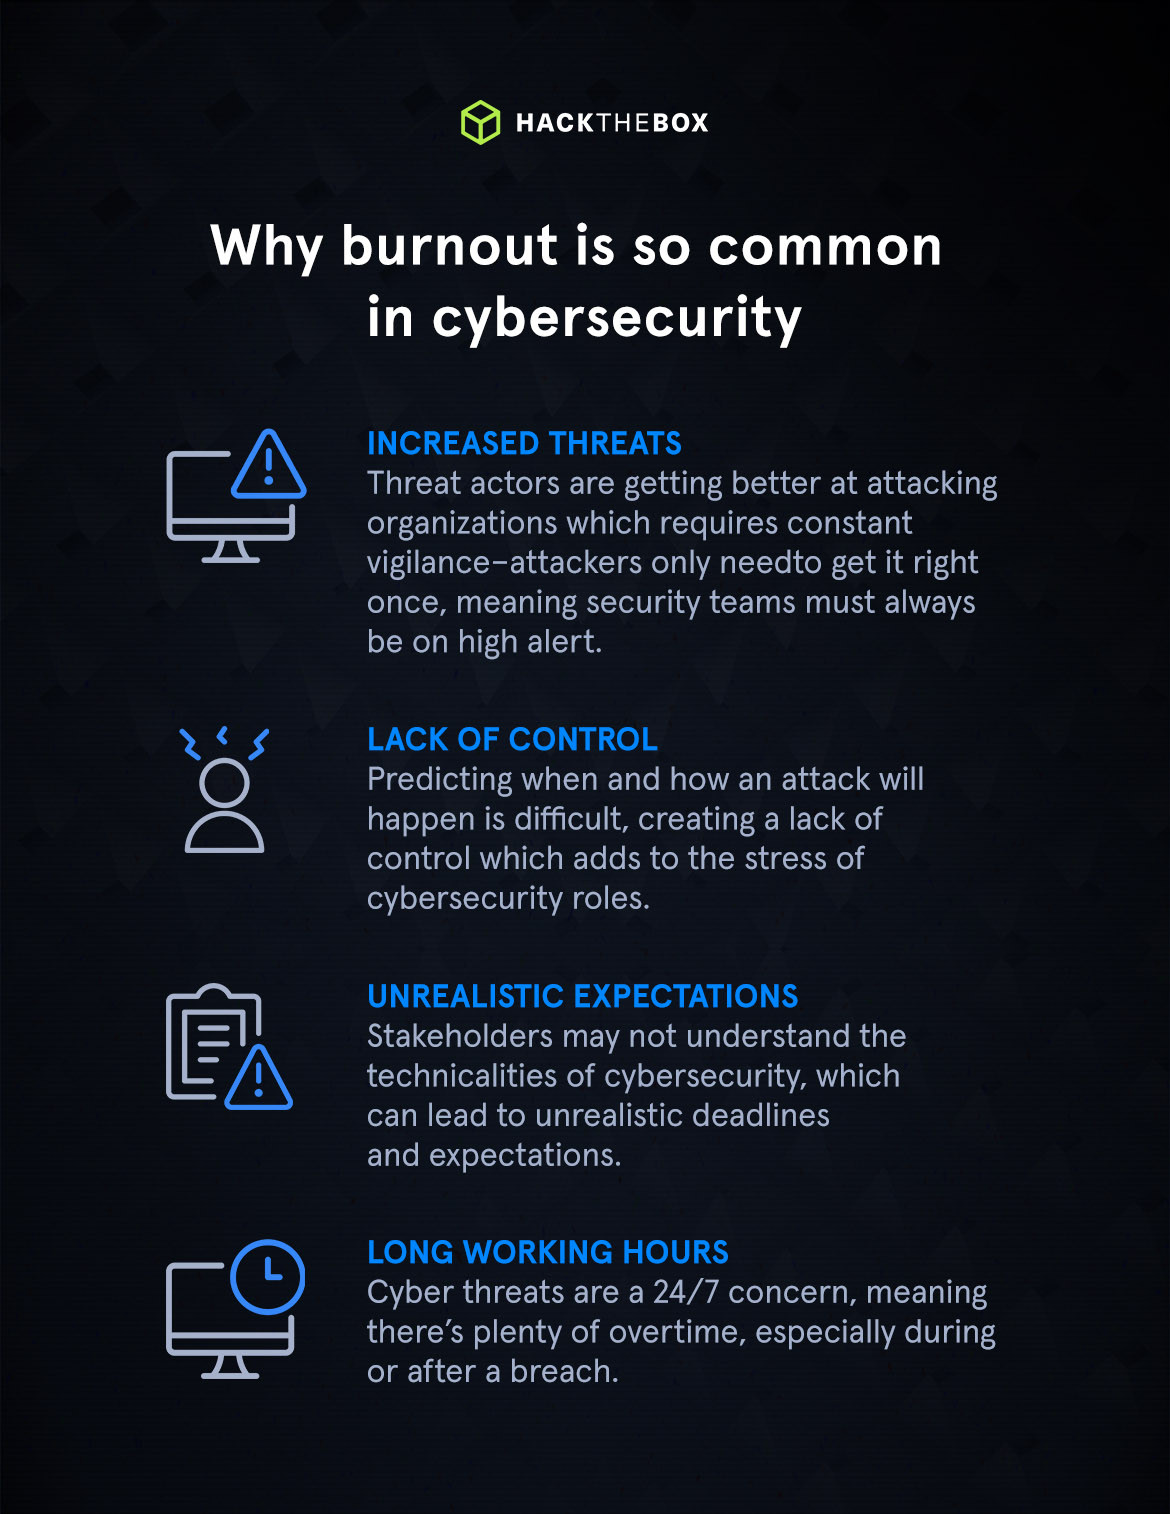 Why burnout is common in cybersecurity